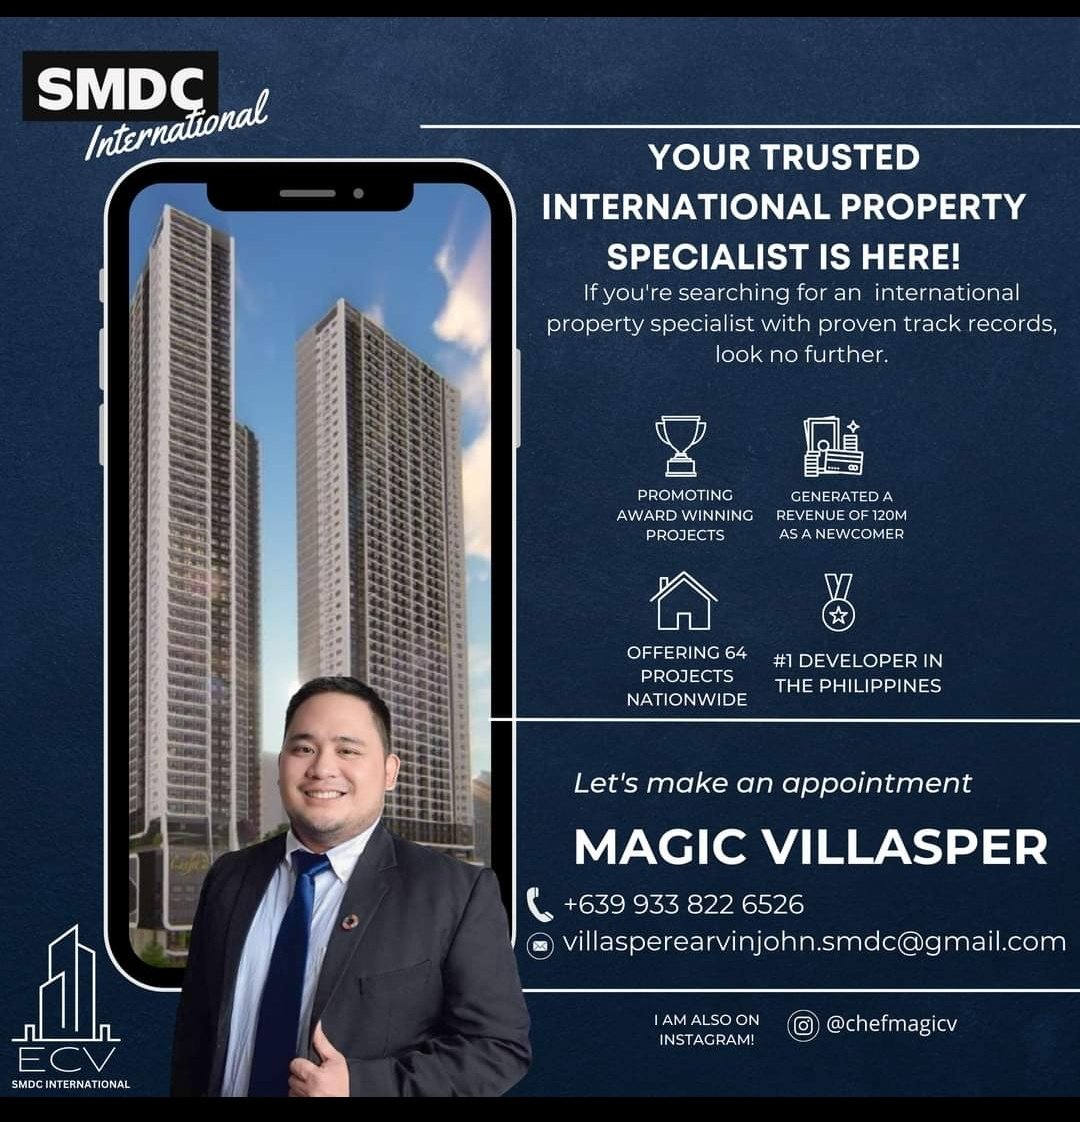 'Unlock Your Dream Property: Look No Further, You've Got Your Specialist!' #SMDC #SMDCInvestment #SMDCInternational #HomeOfTheGoodGuys #TeamECV